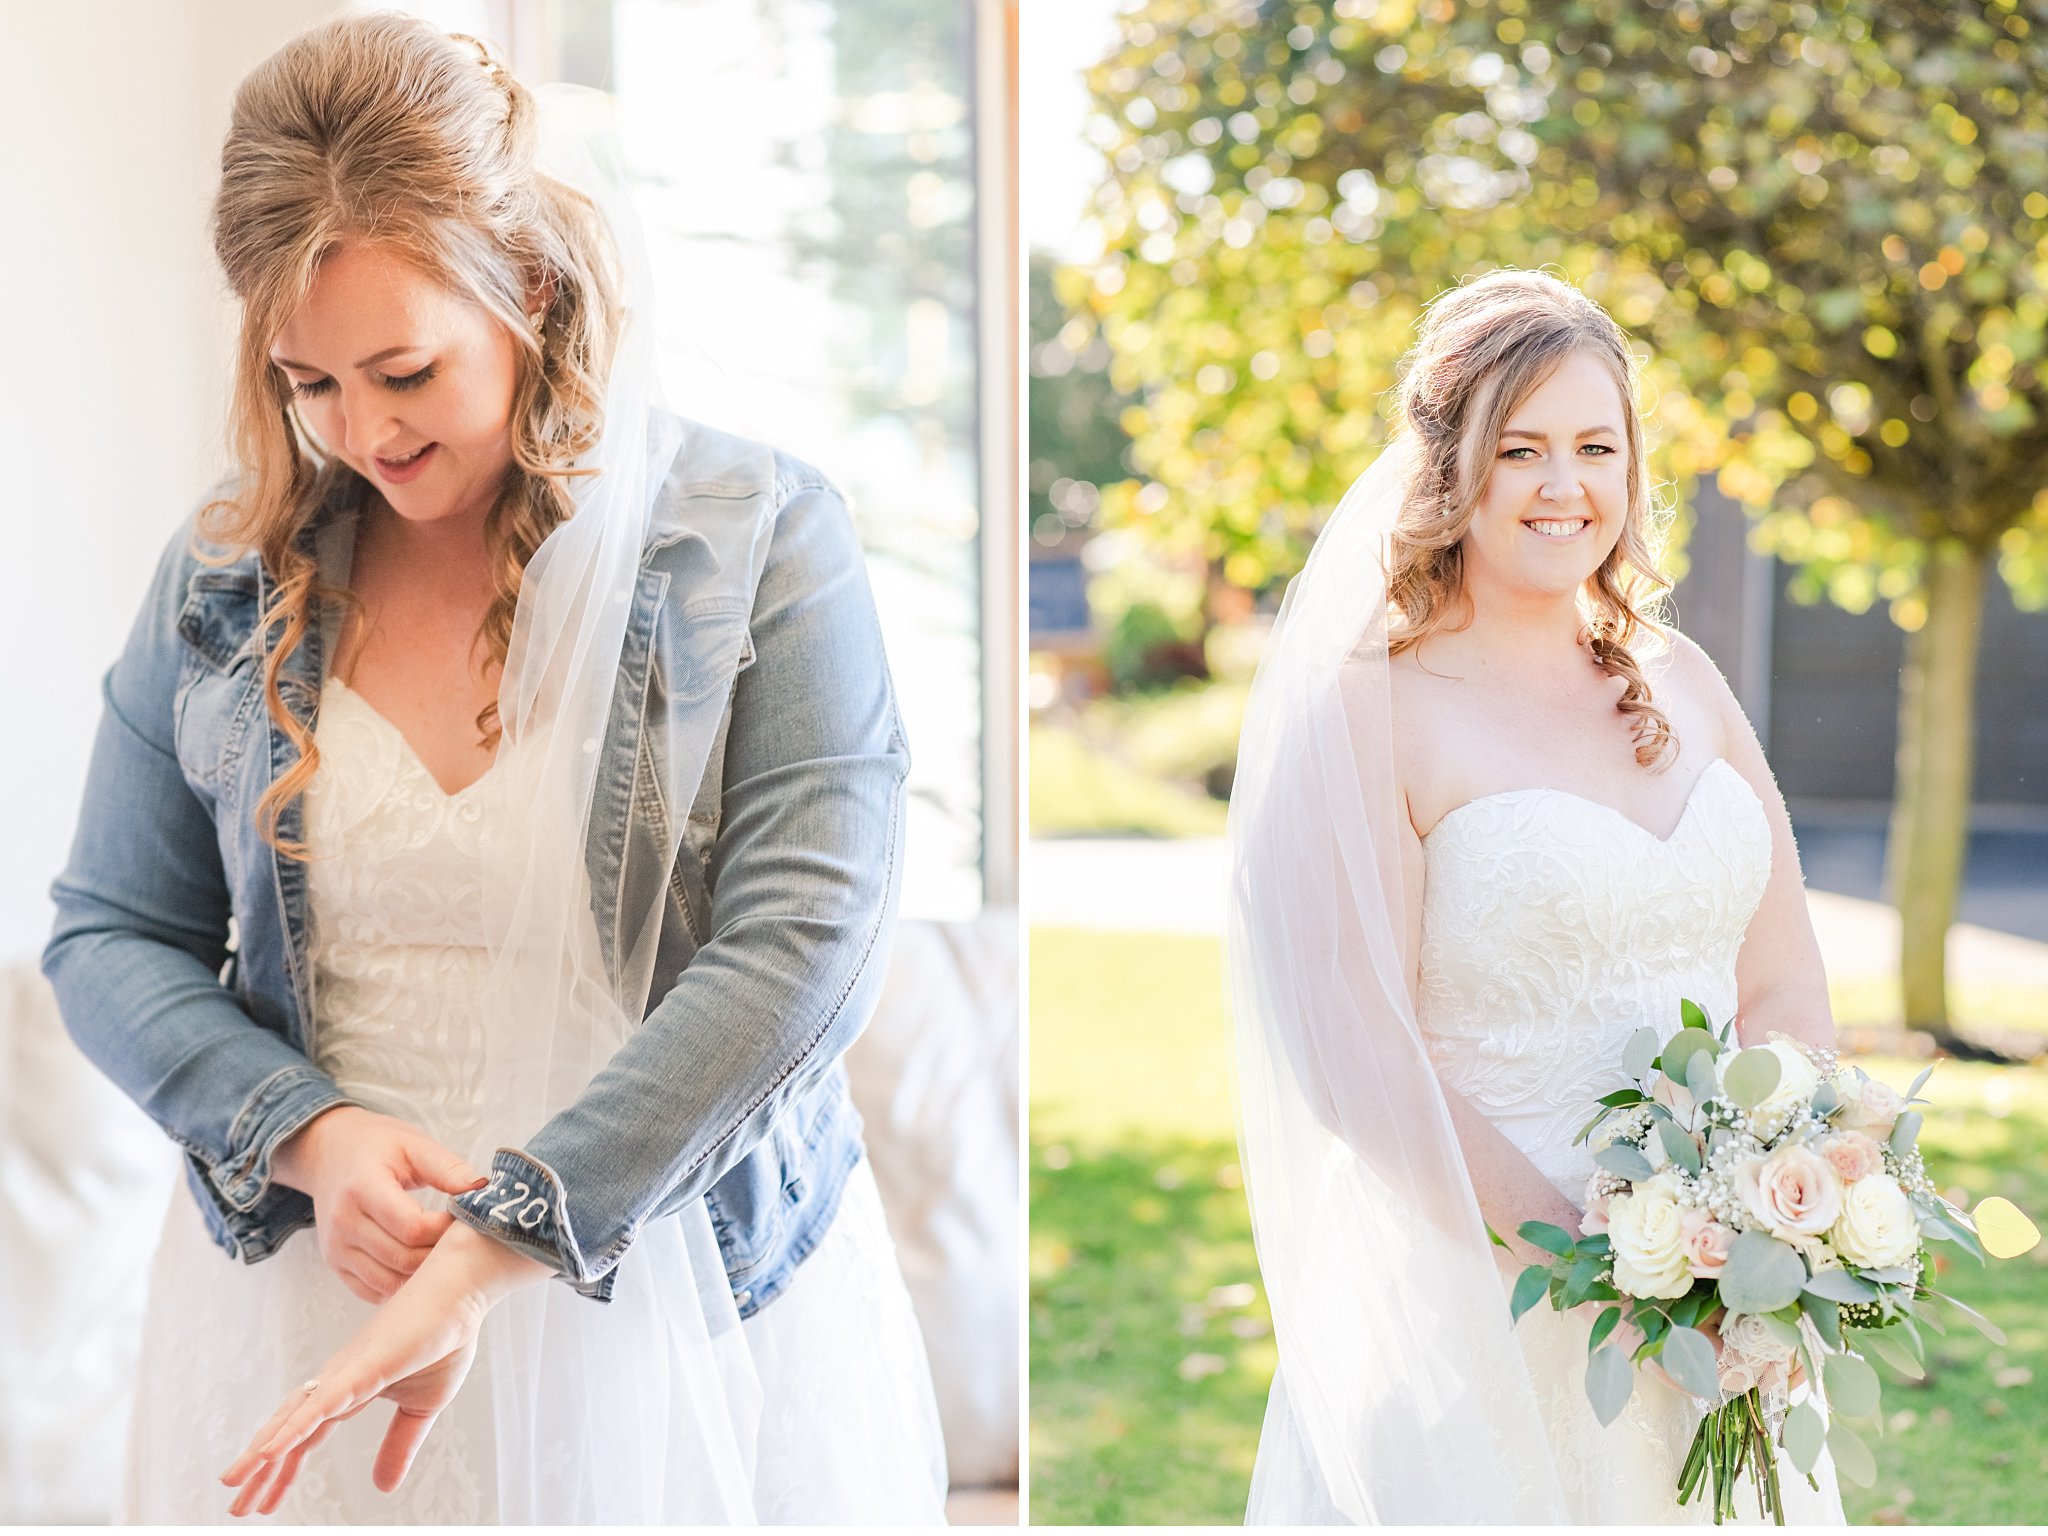 bride poses with her denim jacket and bouquet at her wedding in london ontario